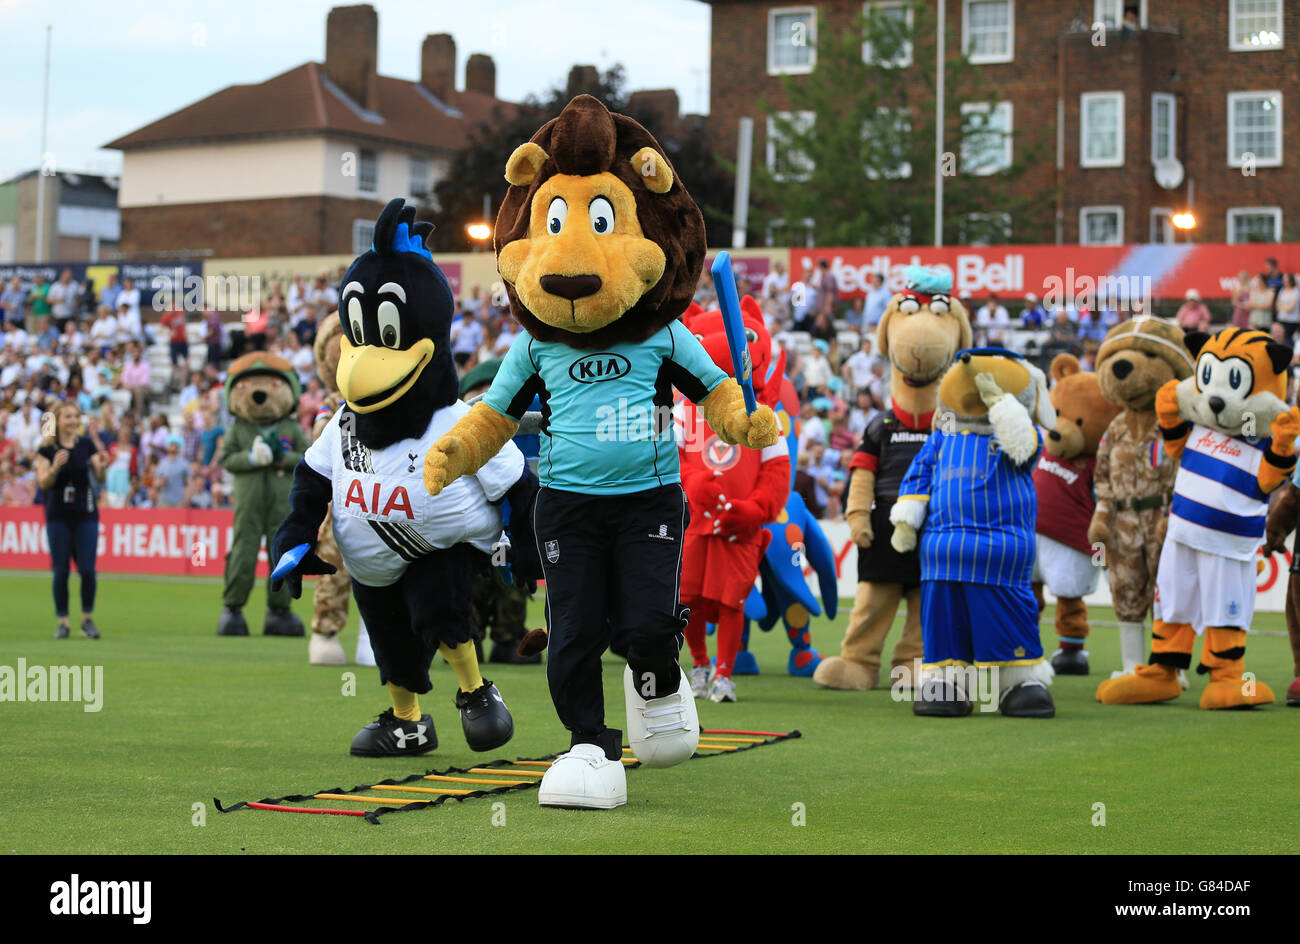 Surrey mascot Caesar the Lion (centre) and Tottenham Hotspur club mascot Chirpy Cockerel (left) during the mascot derby held during the interval Surrey versus Middlesex. Stock Photo